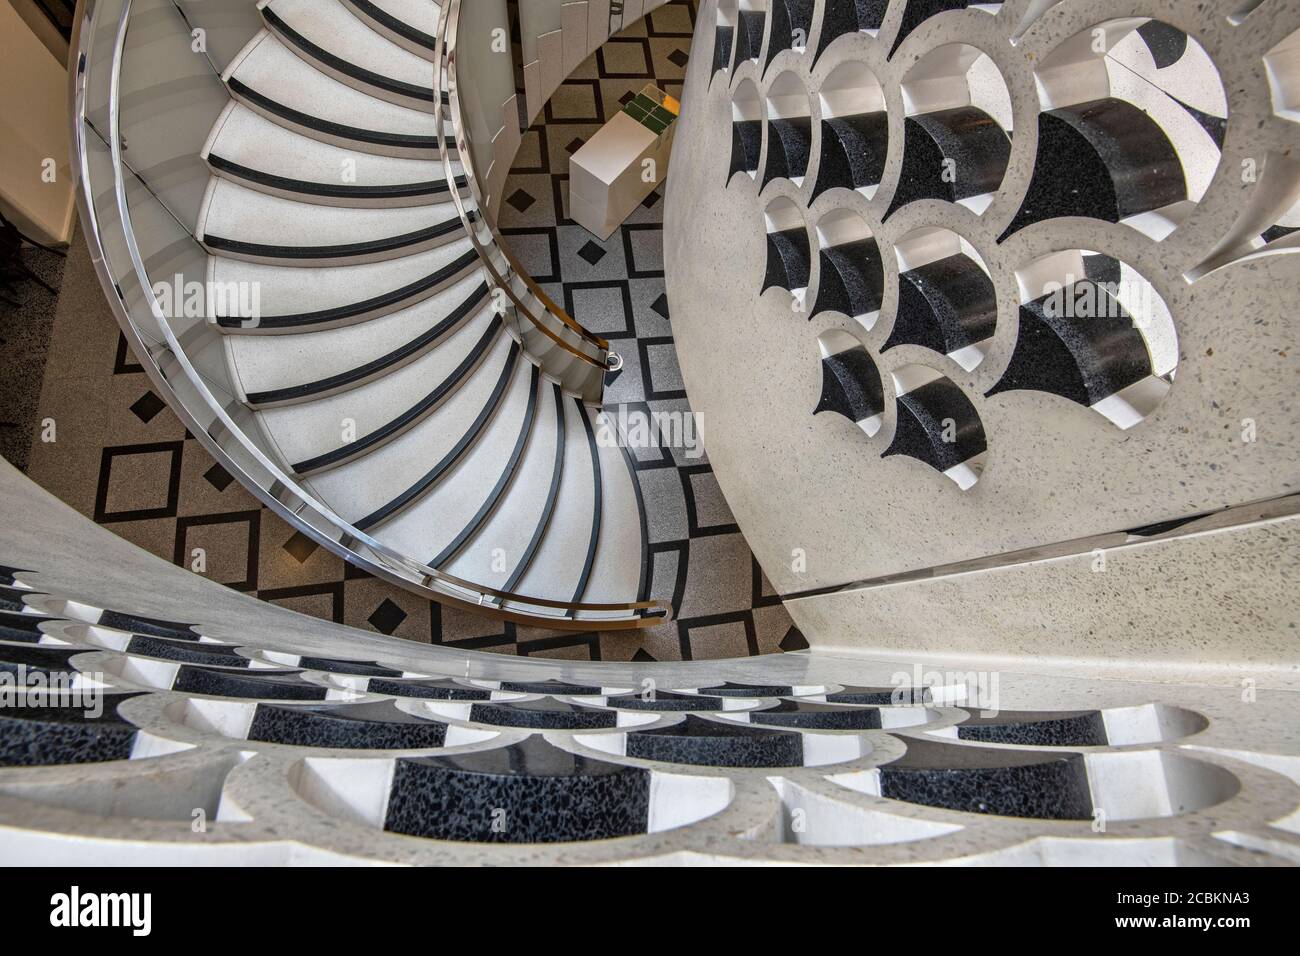 England, London, Tate Britain, Looking down on the modern staircase from the entrance rotunda. Stock Photo